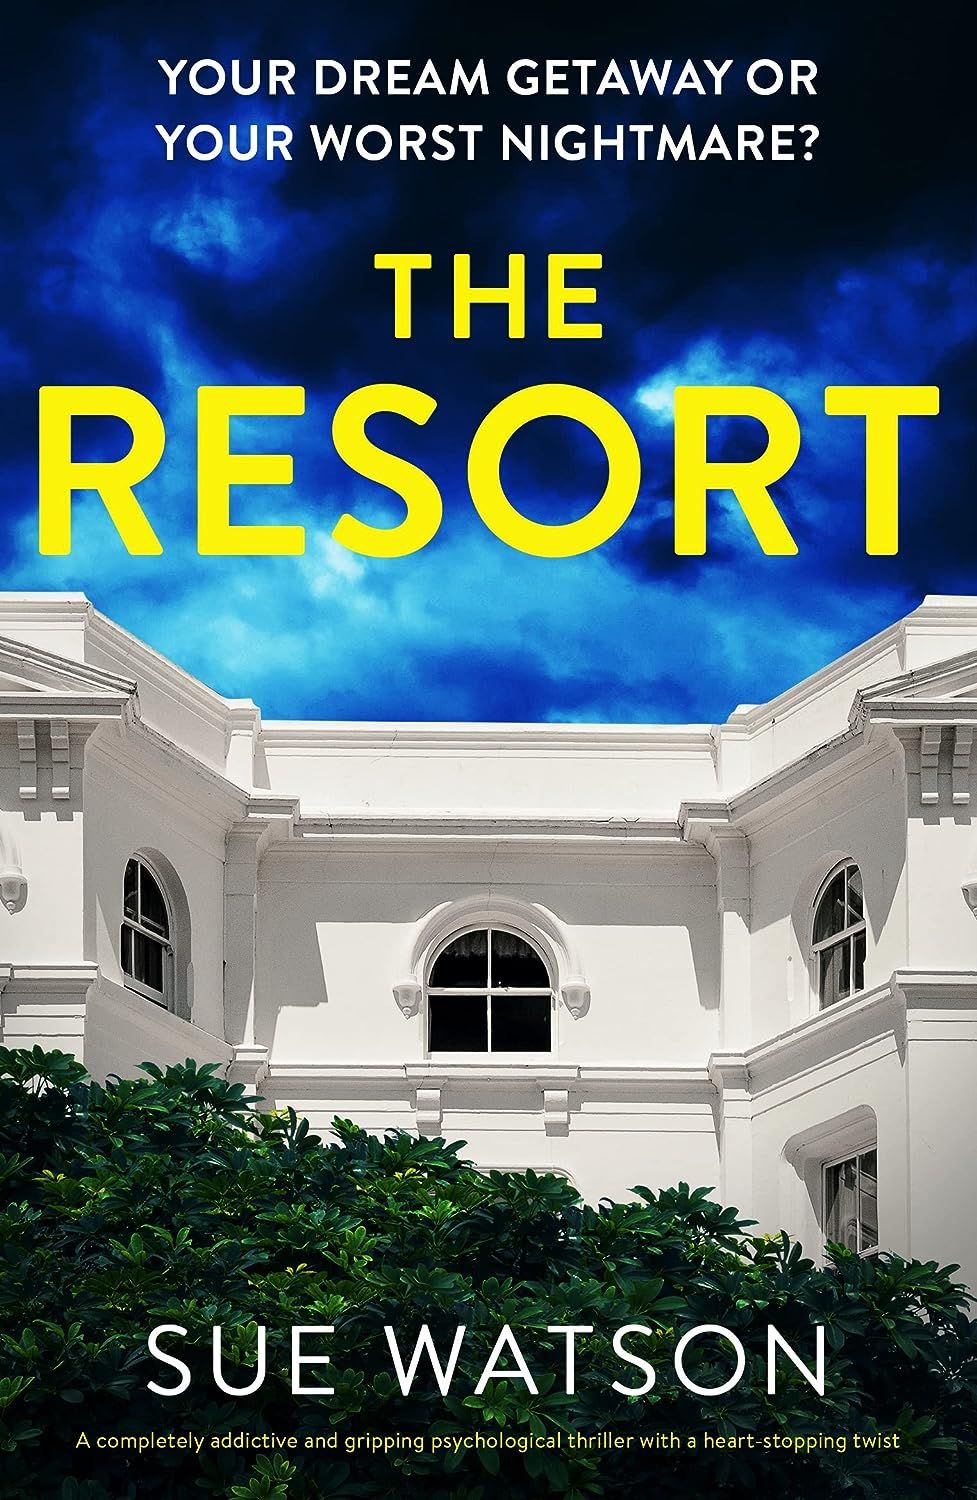 The Resort: A completely addictive and gripping psychological thriller with a heart-stopping twist | Amazon (US)